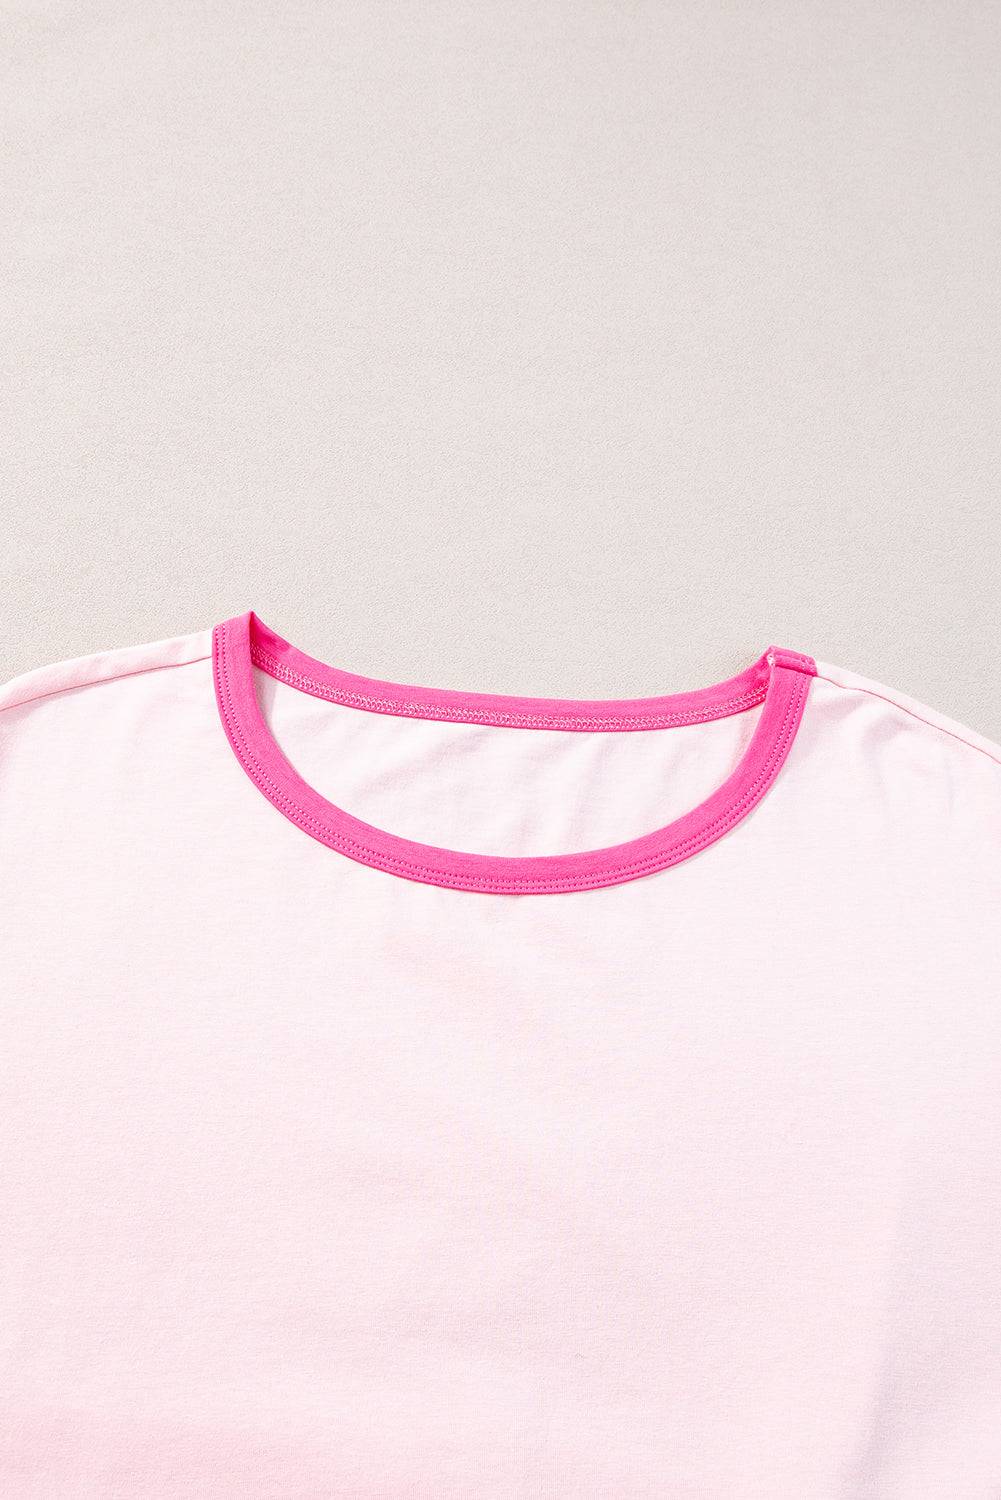 a white shirt with pink trim on a white background